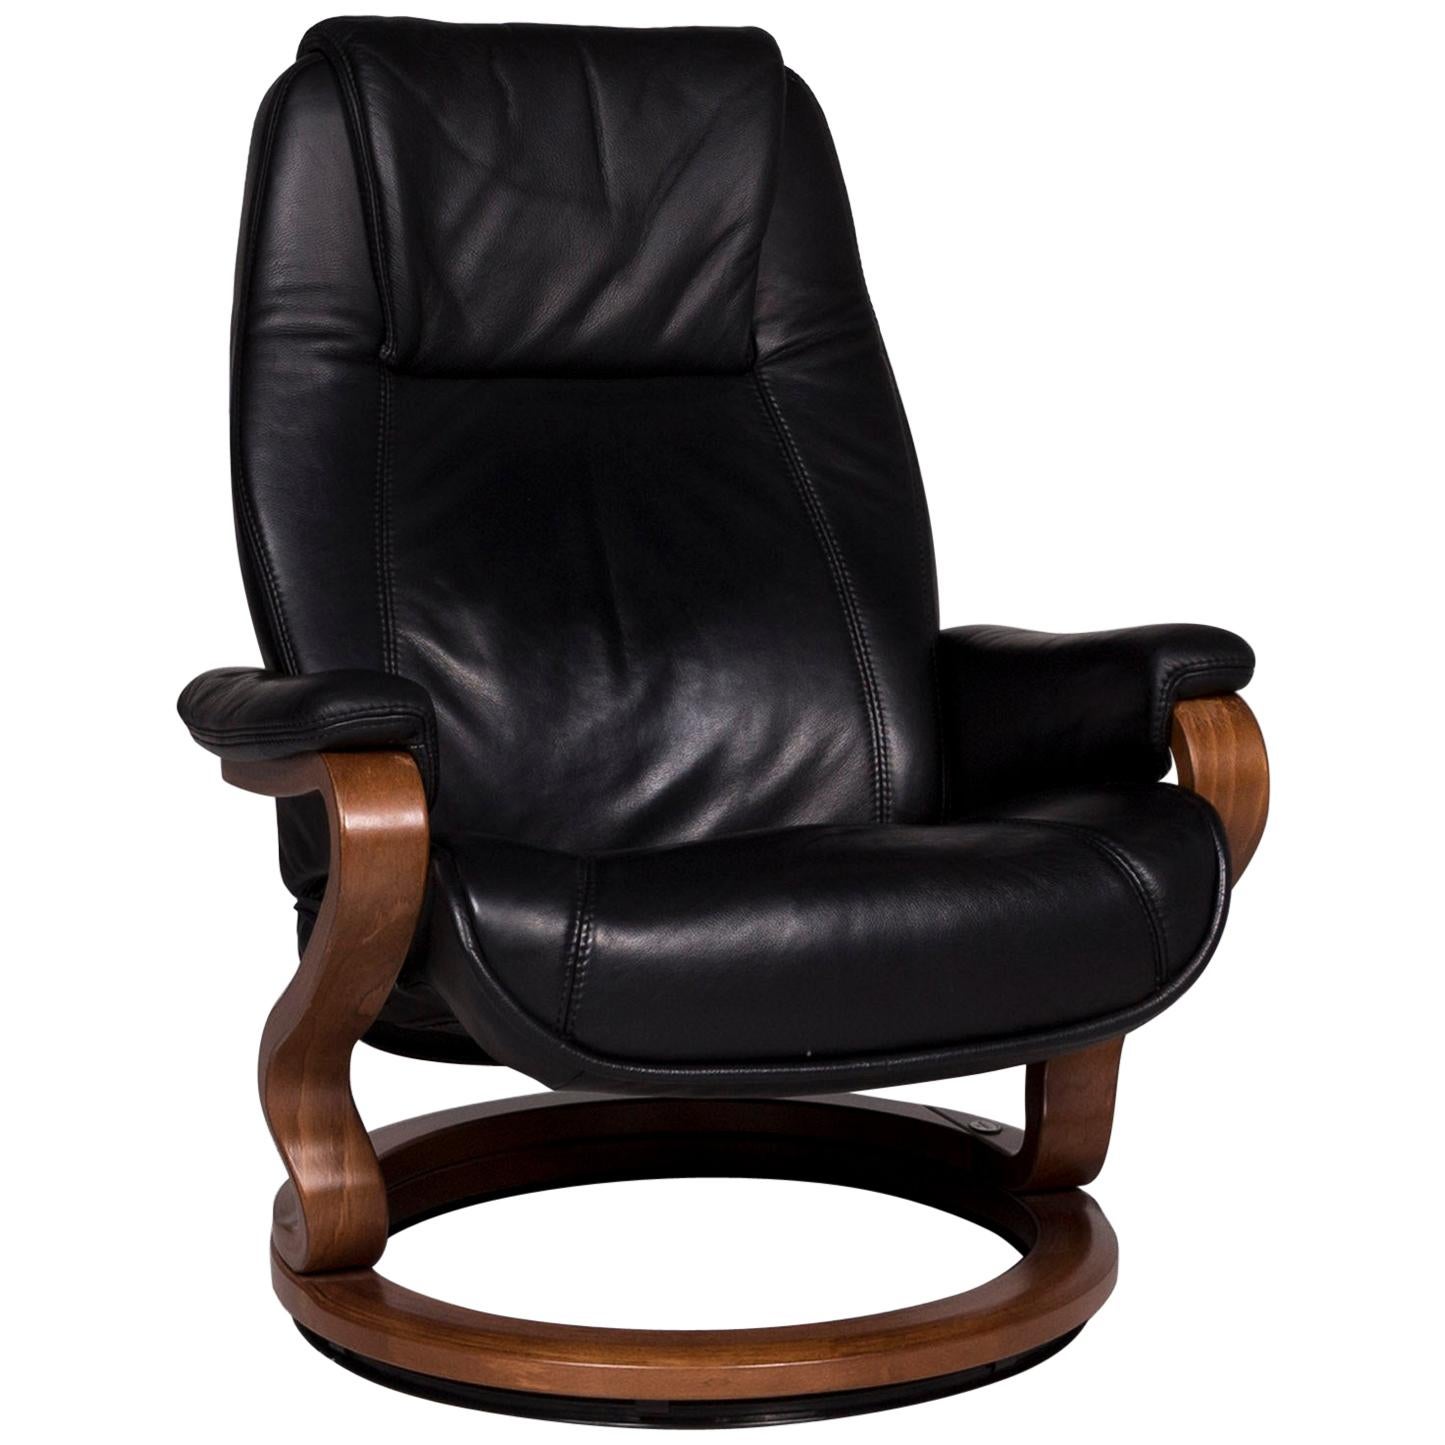 Himolla Leather Armchair Black Wood Relax Function For Sale